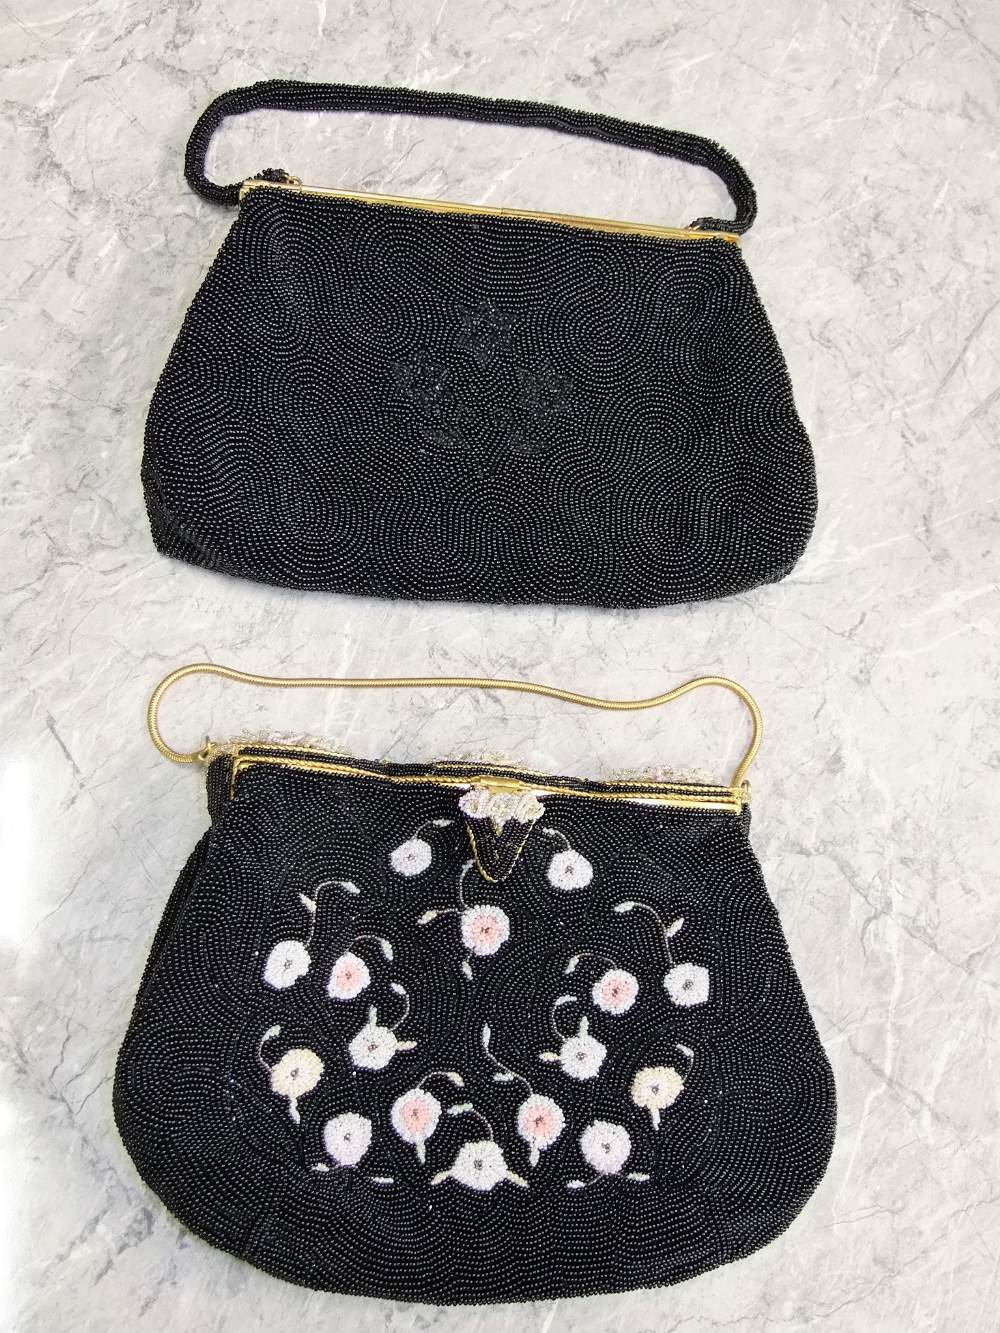 Two French beadwork evening bags in black. One with coloured floral detail